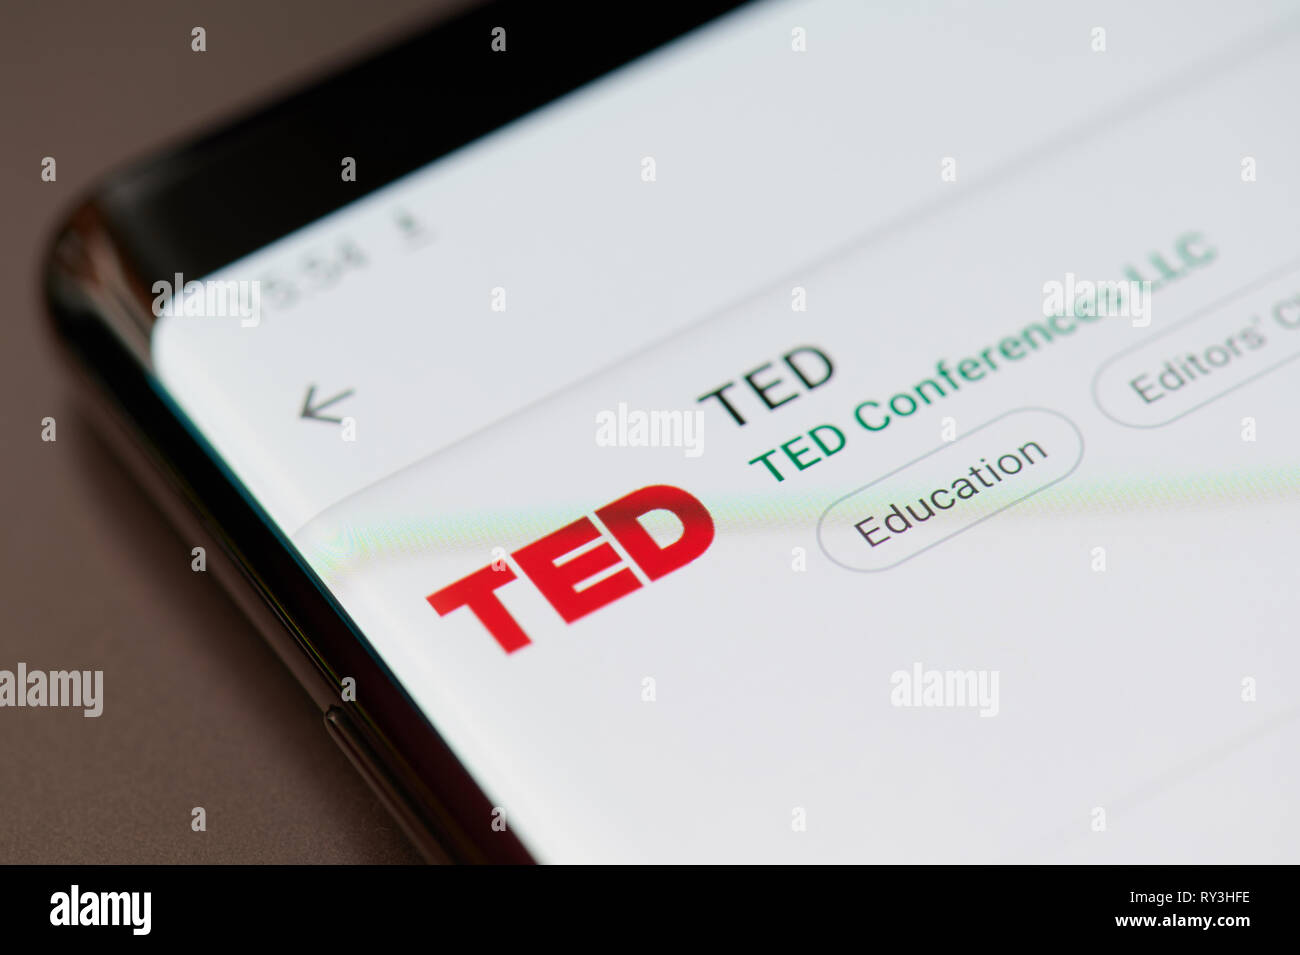 New york, USA - march 11, 2019: Ted education  app in google play store on smartphone screen Stock Photo